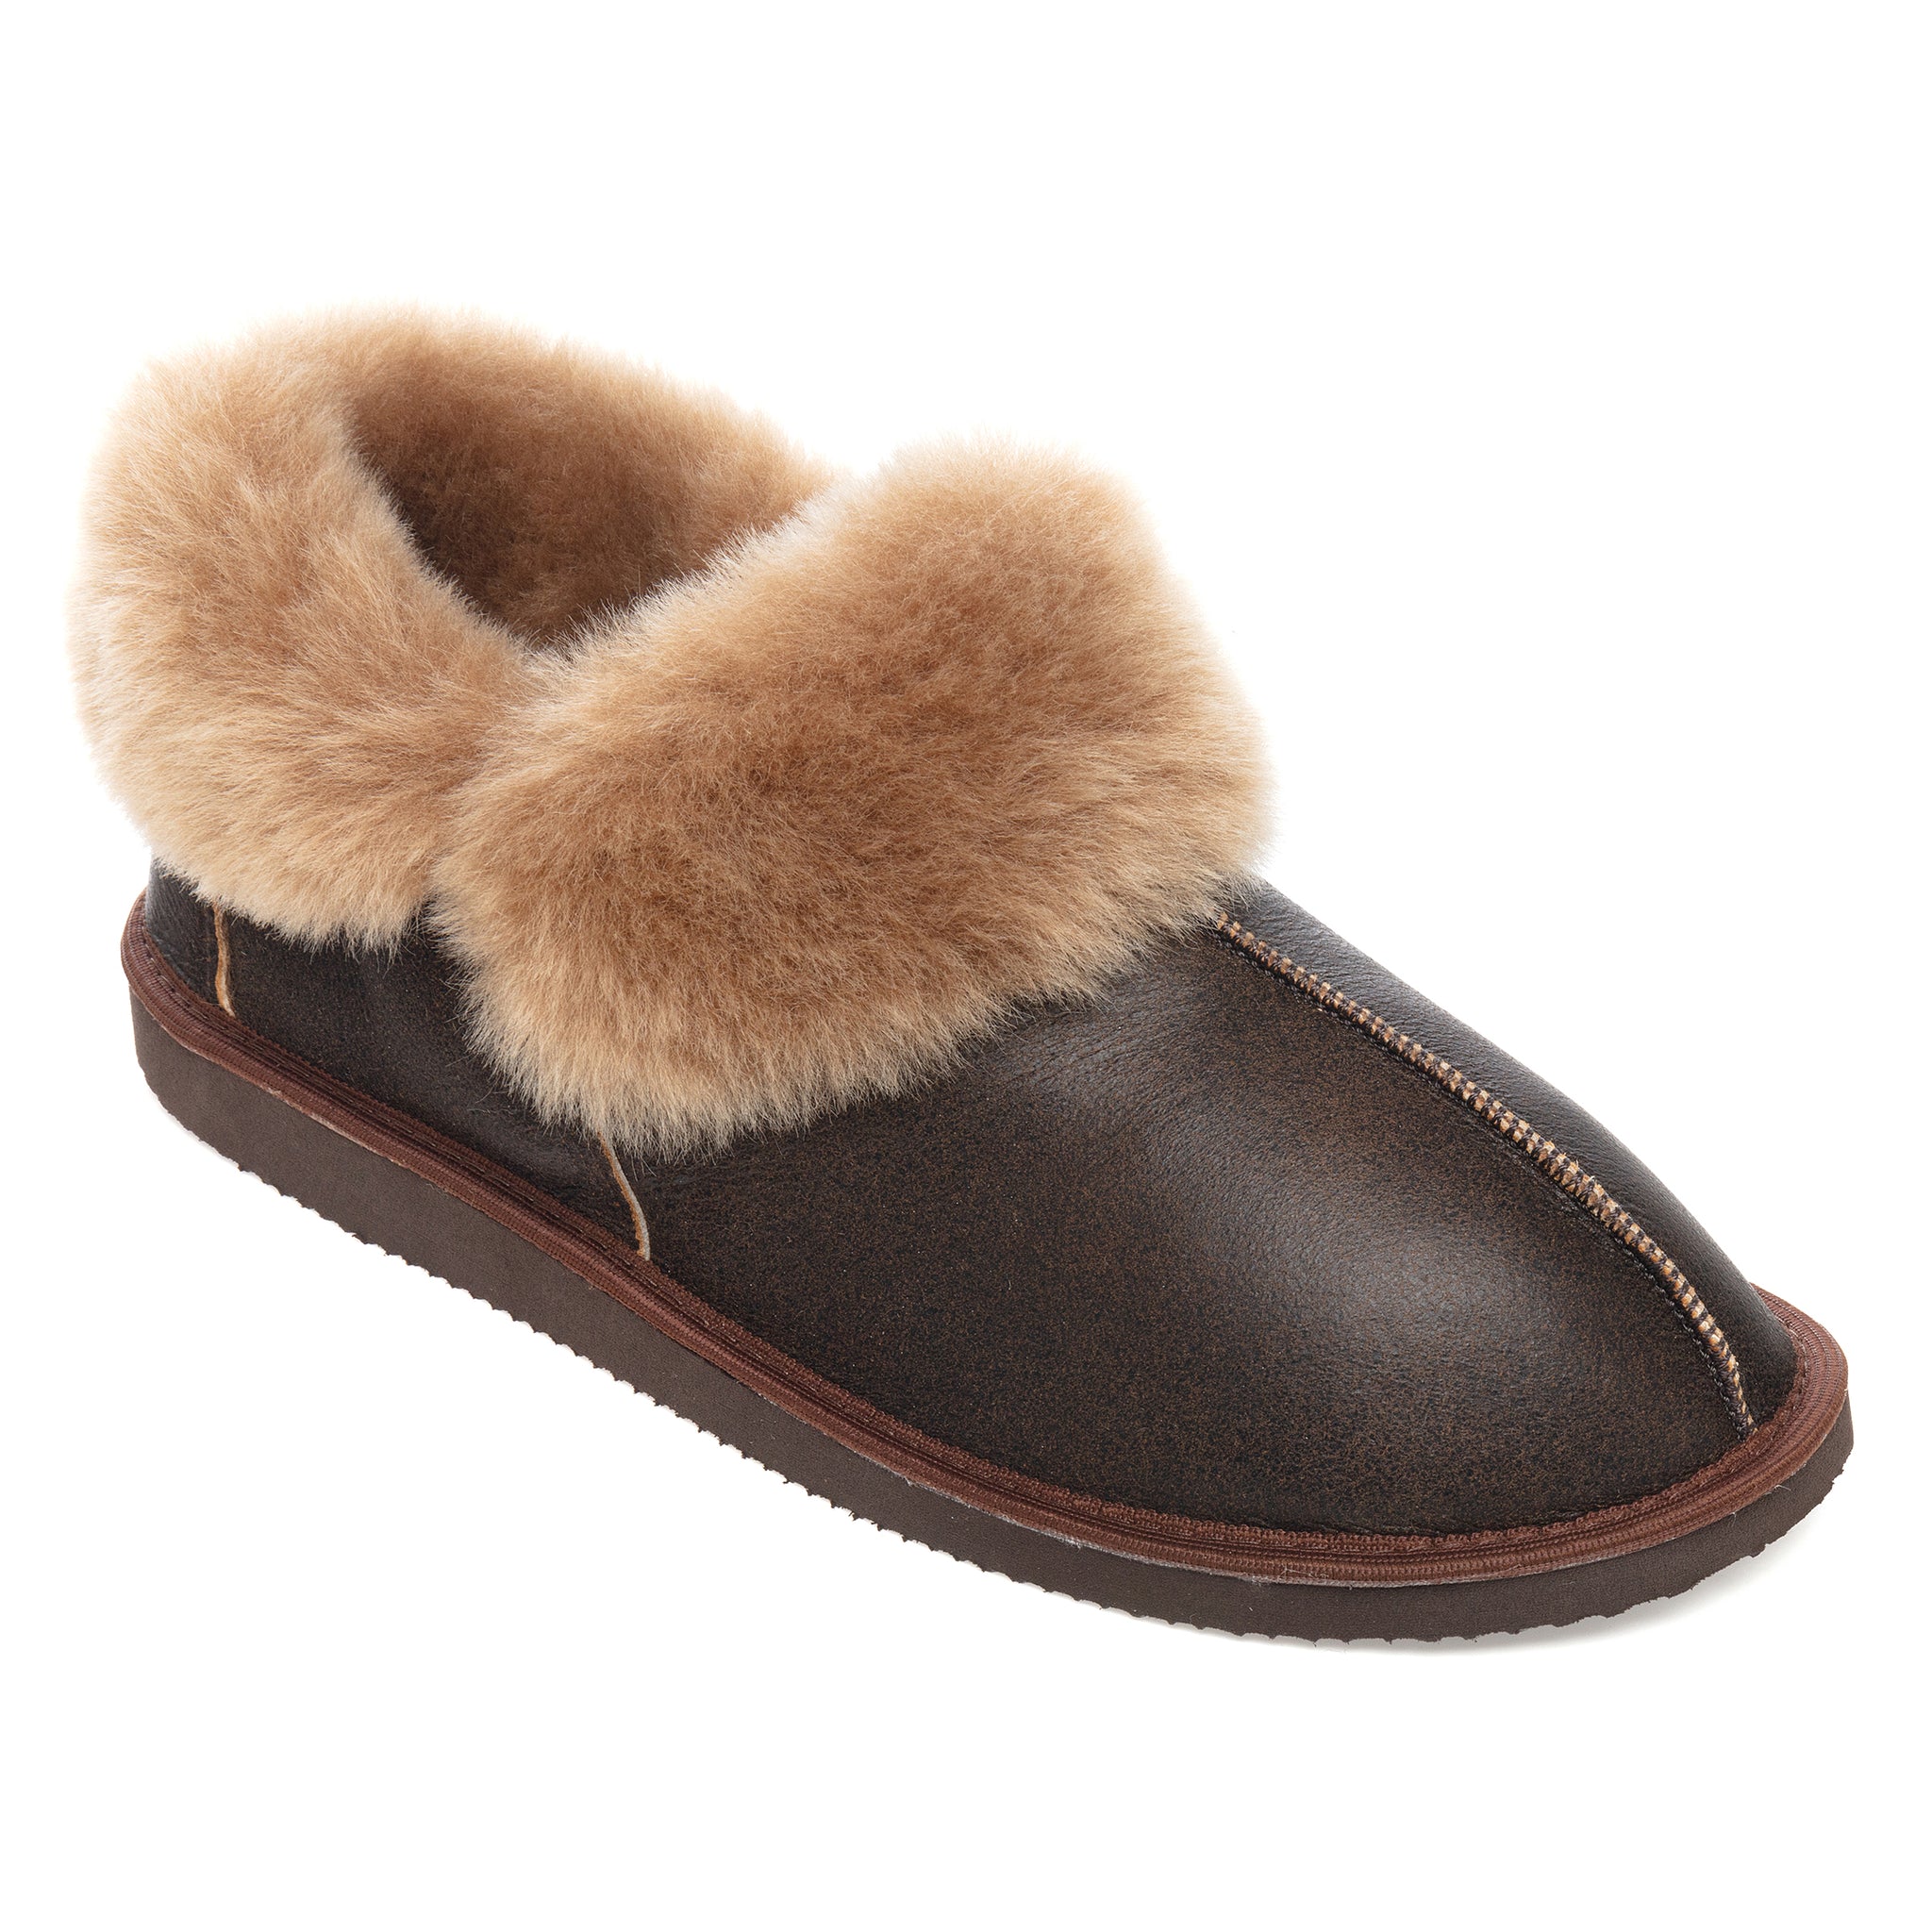 The Comfort and Warmth of Sheepskin A Guide to Men